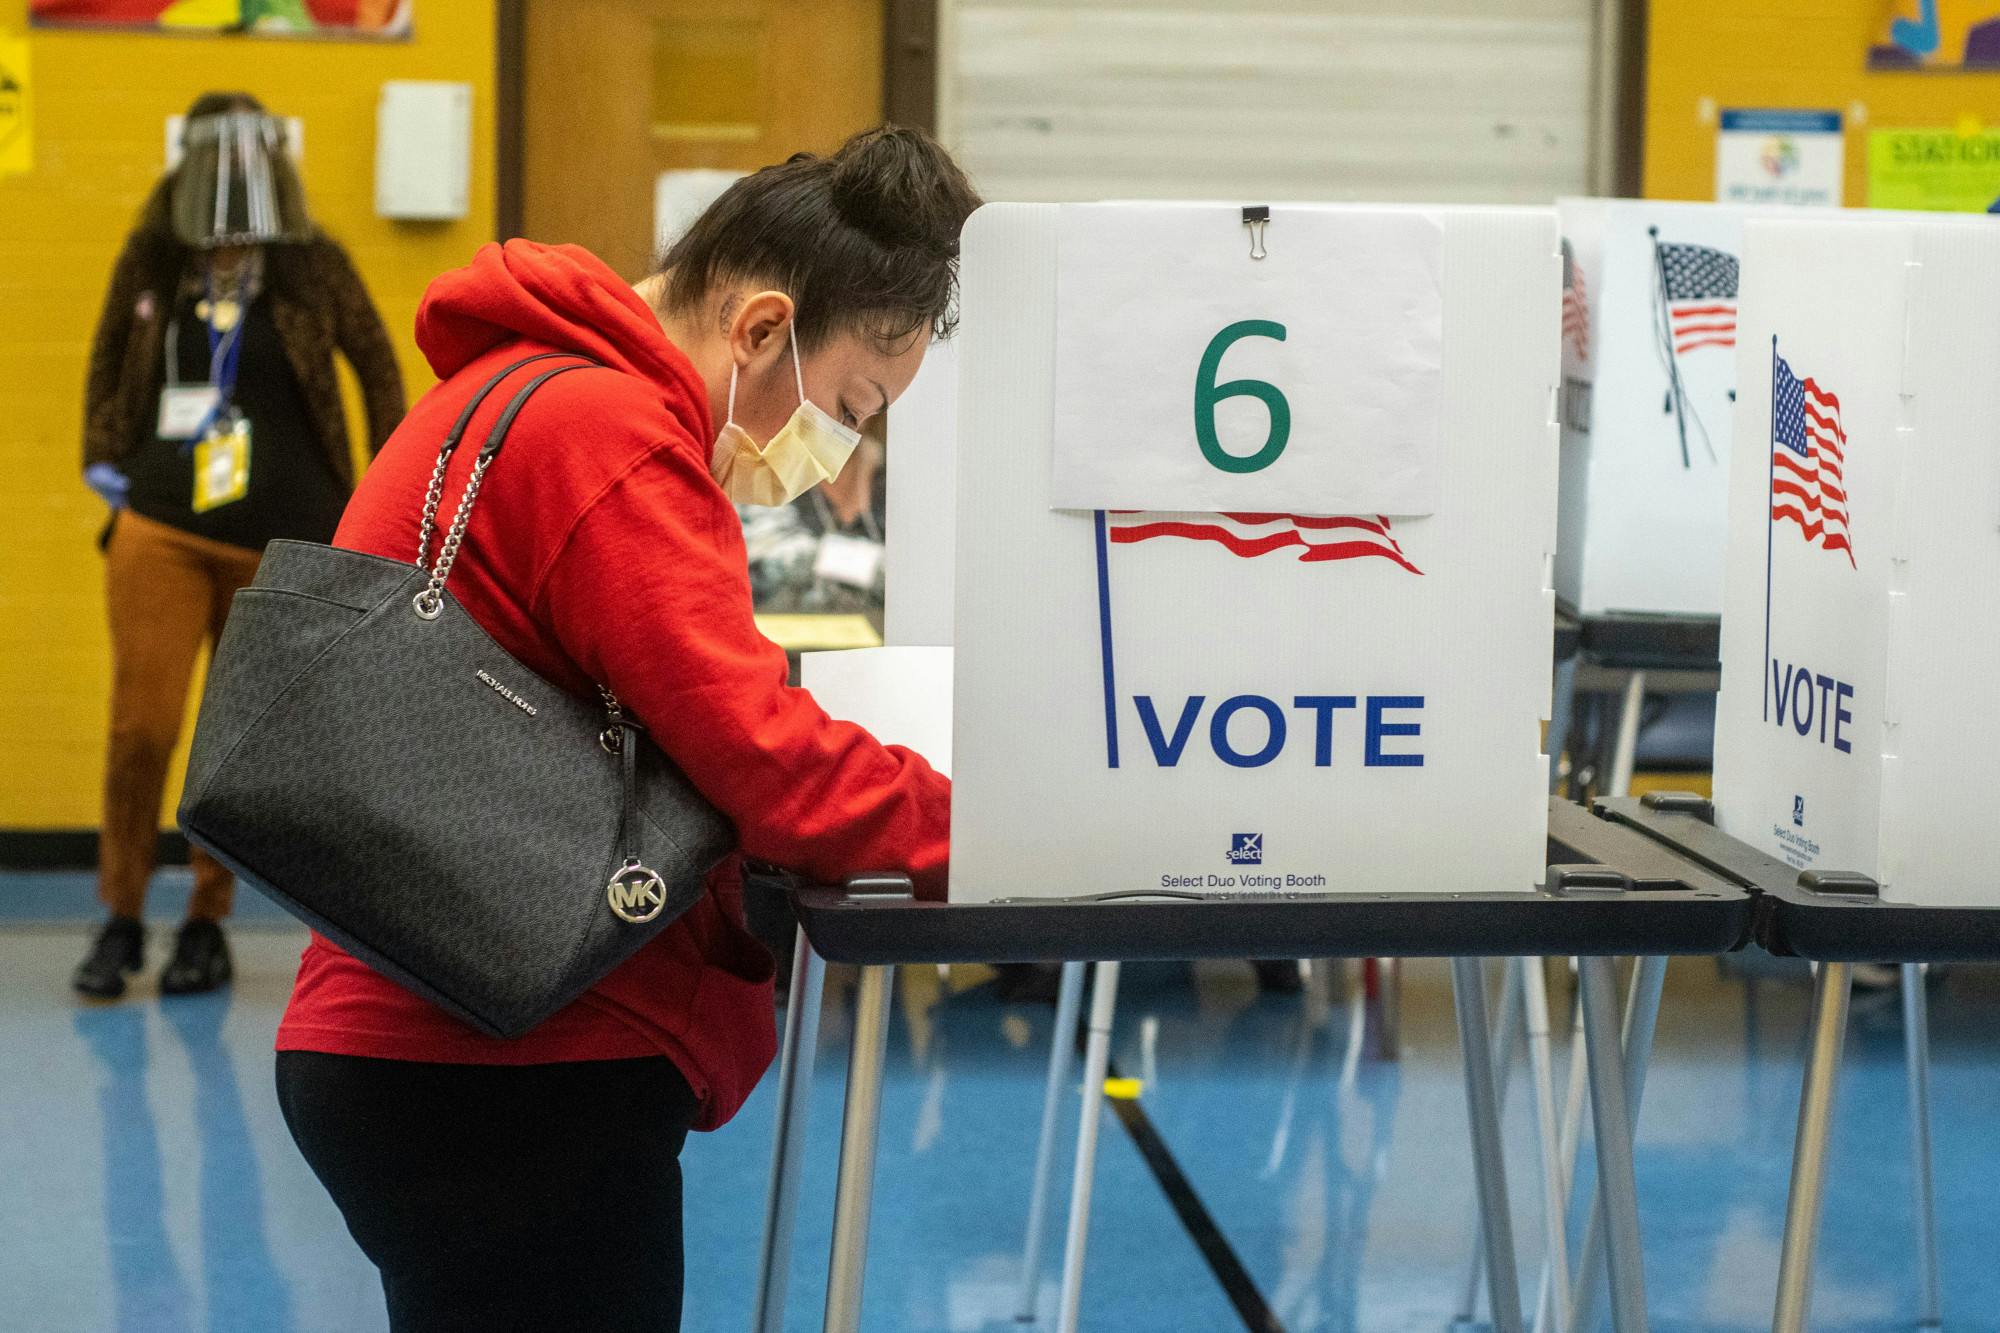 <p>A voter fills out their ballot at Willow Elementary School in Lansing on Nov. 3, 2020. This site houses two precincts and had people trickling in for both precincts.</p>